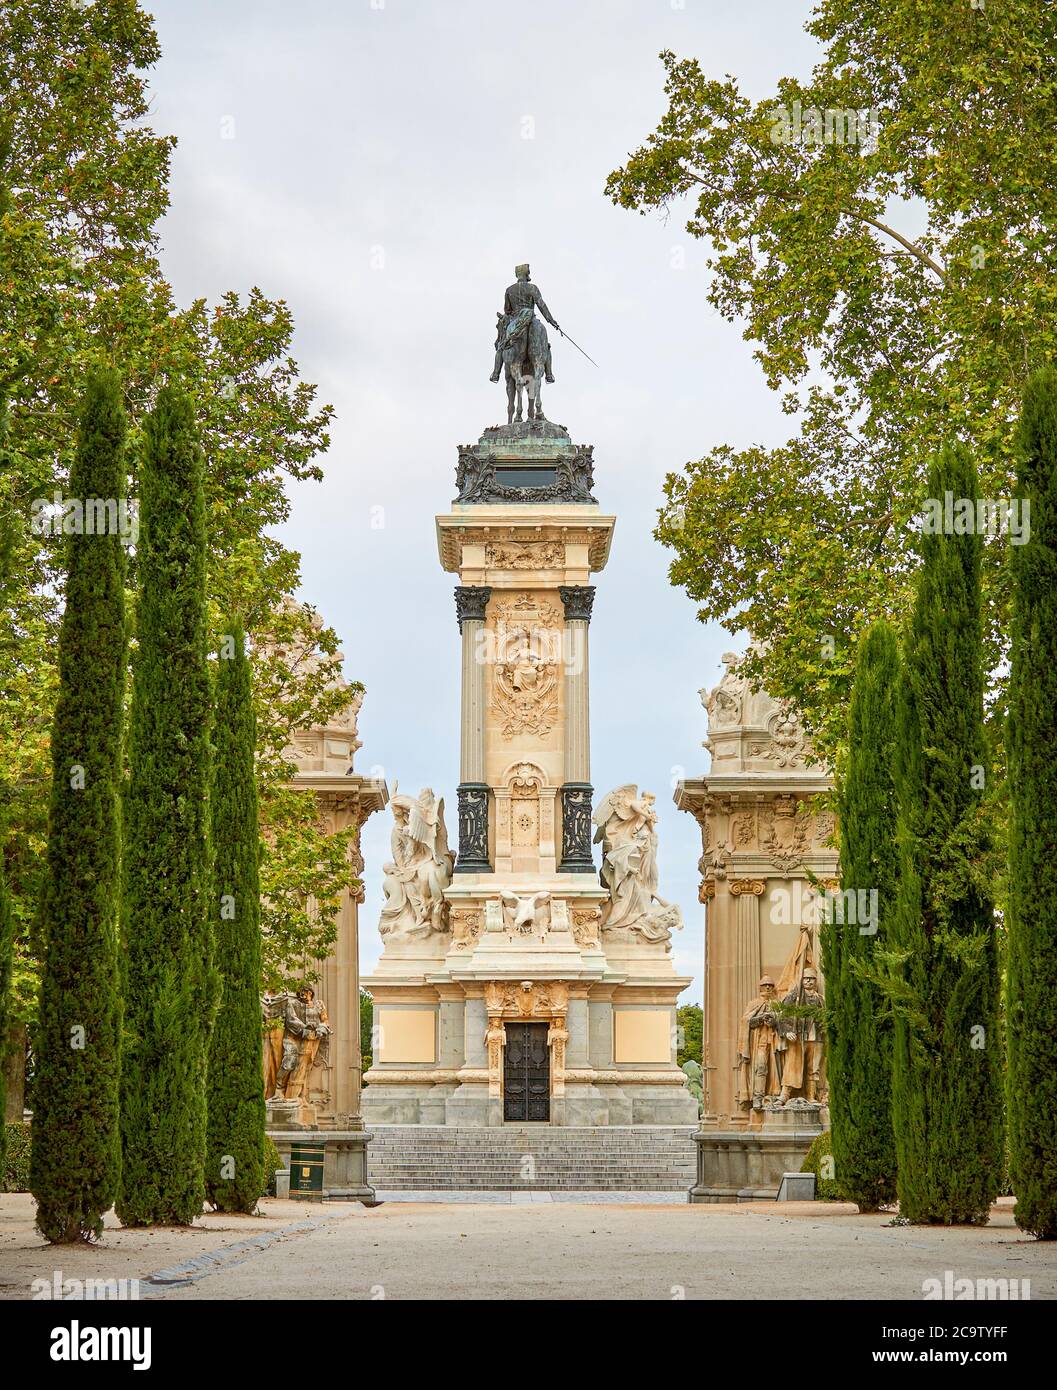 Madrid, Spain - June 16, 2020: Monument to the former King of Spain Alfonso XII in the Retiro Park in Madrid. Stock Photo